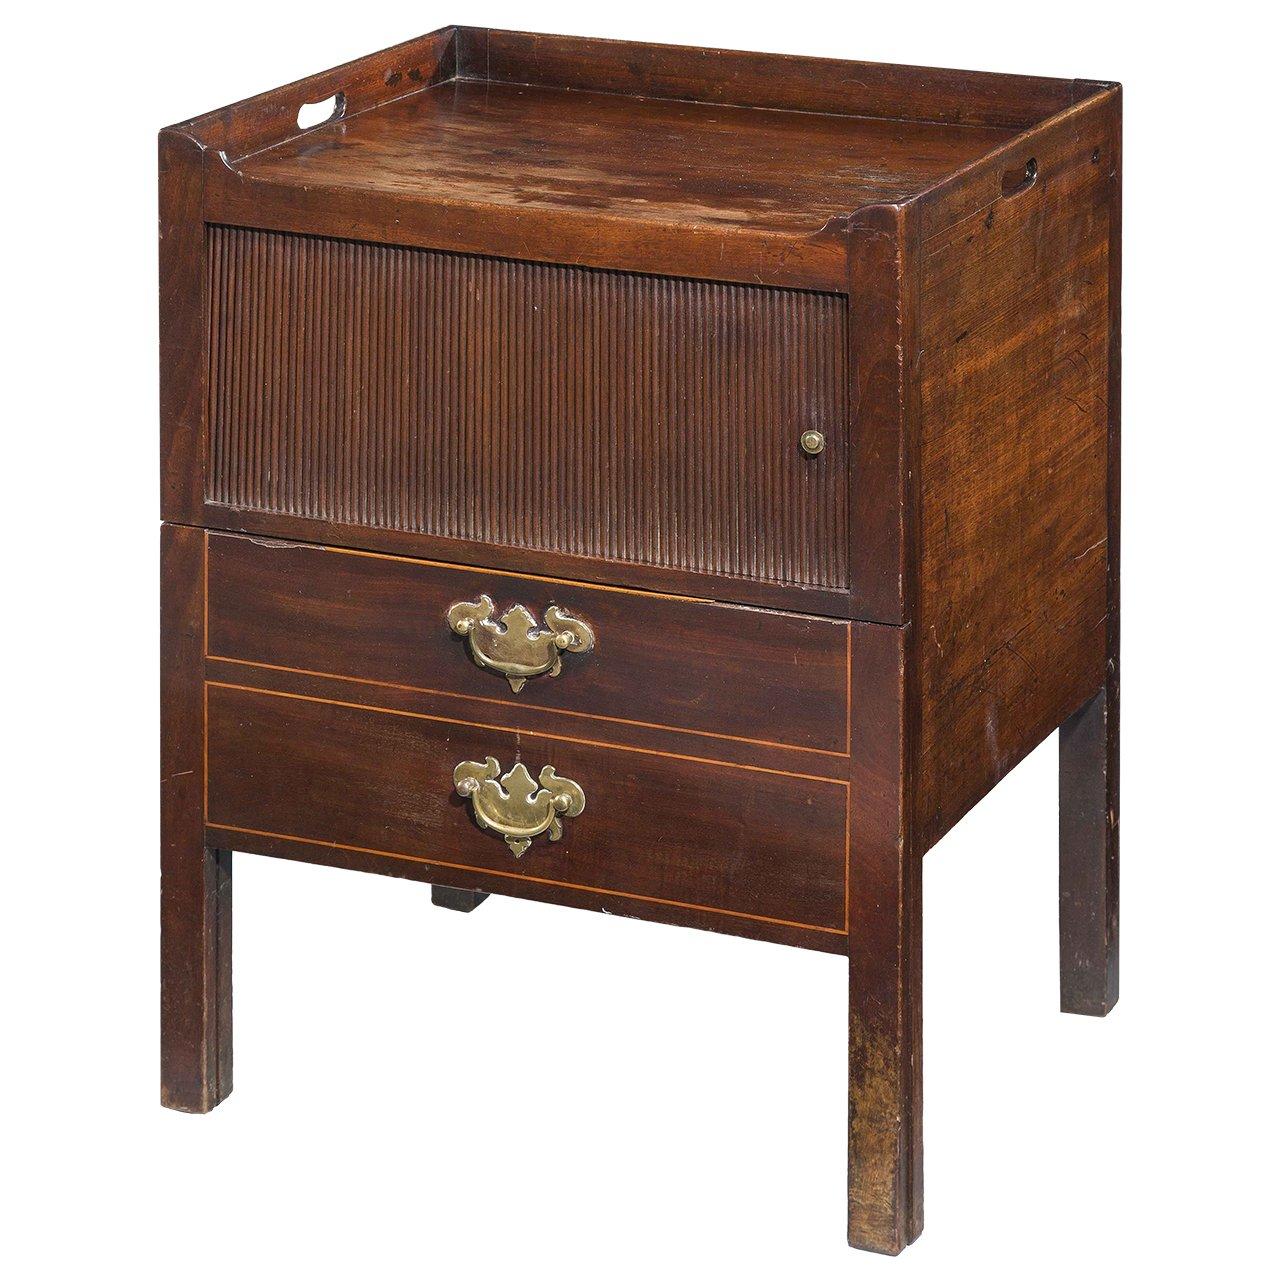 Chippendale Period Mahogany Tambour-Fronted Night Cupboard